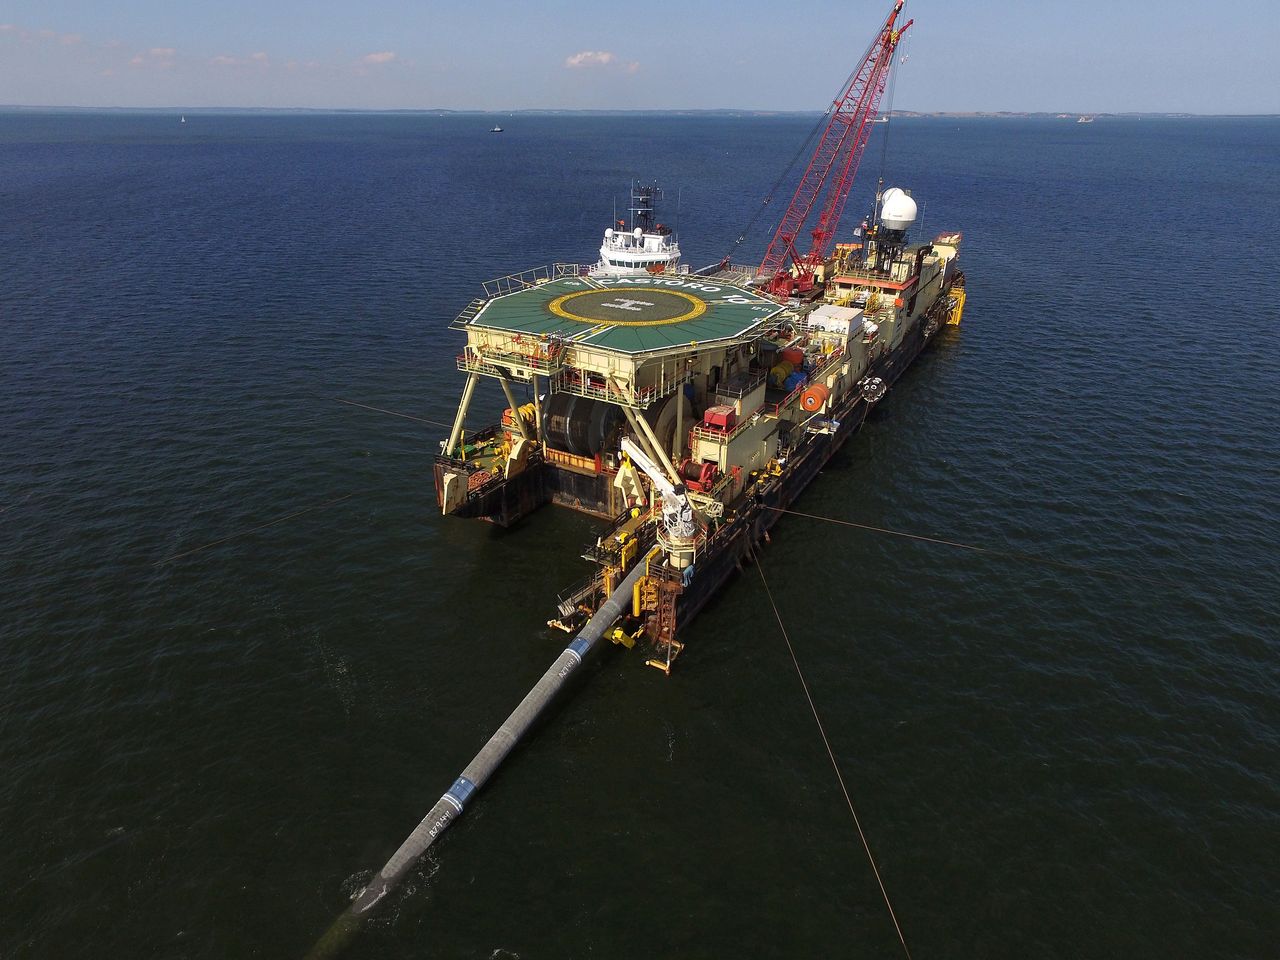 Laying the Nord Stream 2 pipeline on the bottom of the Baltic Sea, August 2018